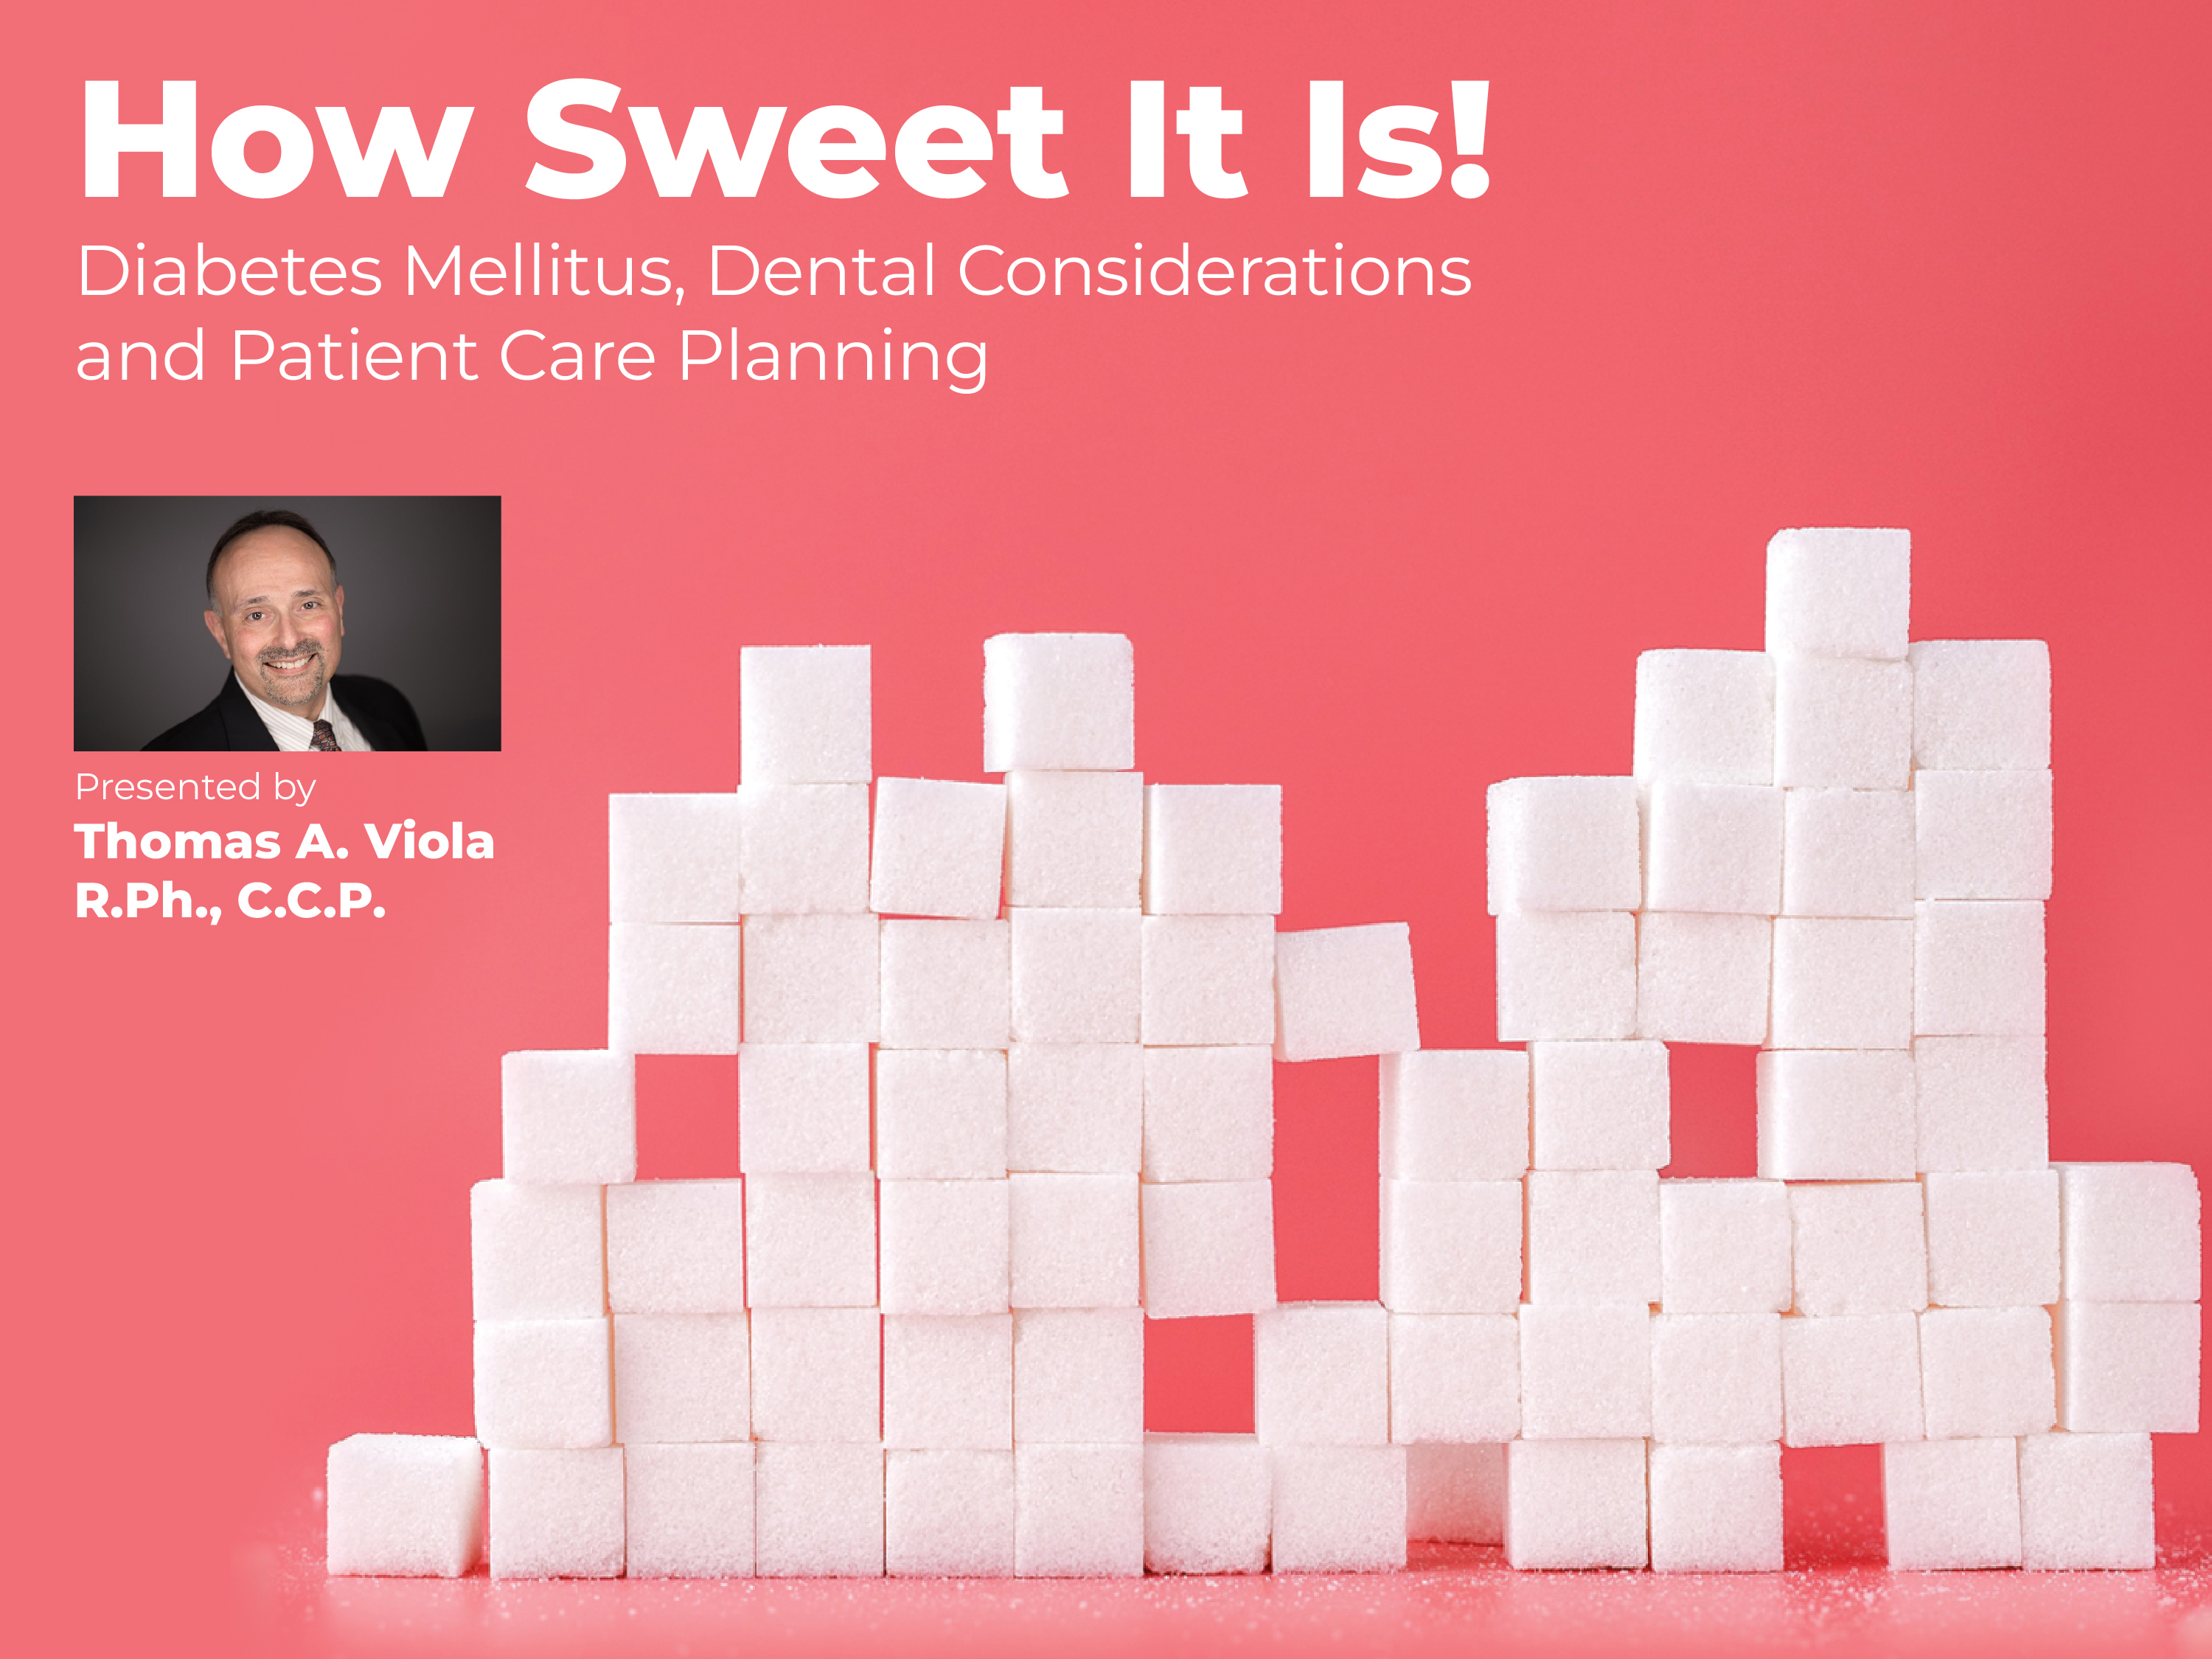 How Sweet It Is! Diabetes Mellitus, Dental Considerations and Patient Care Planning